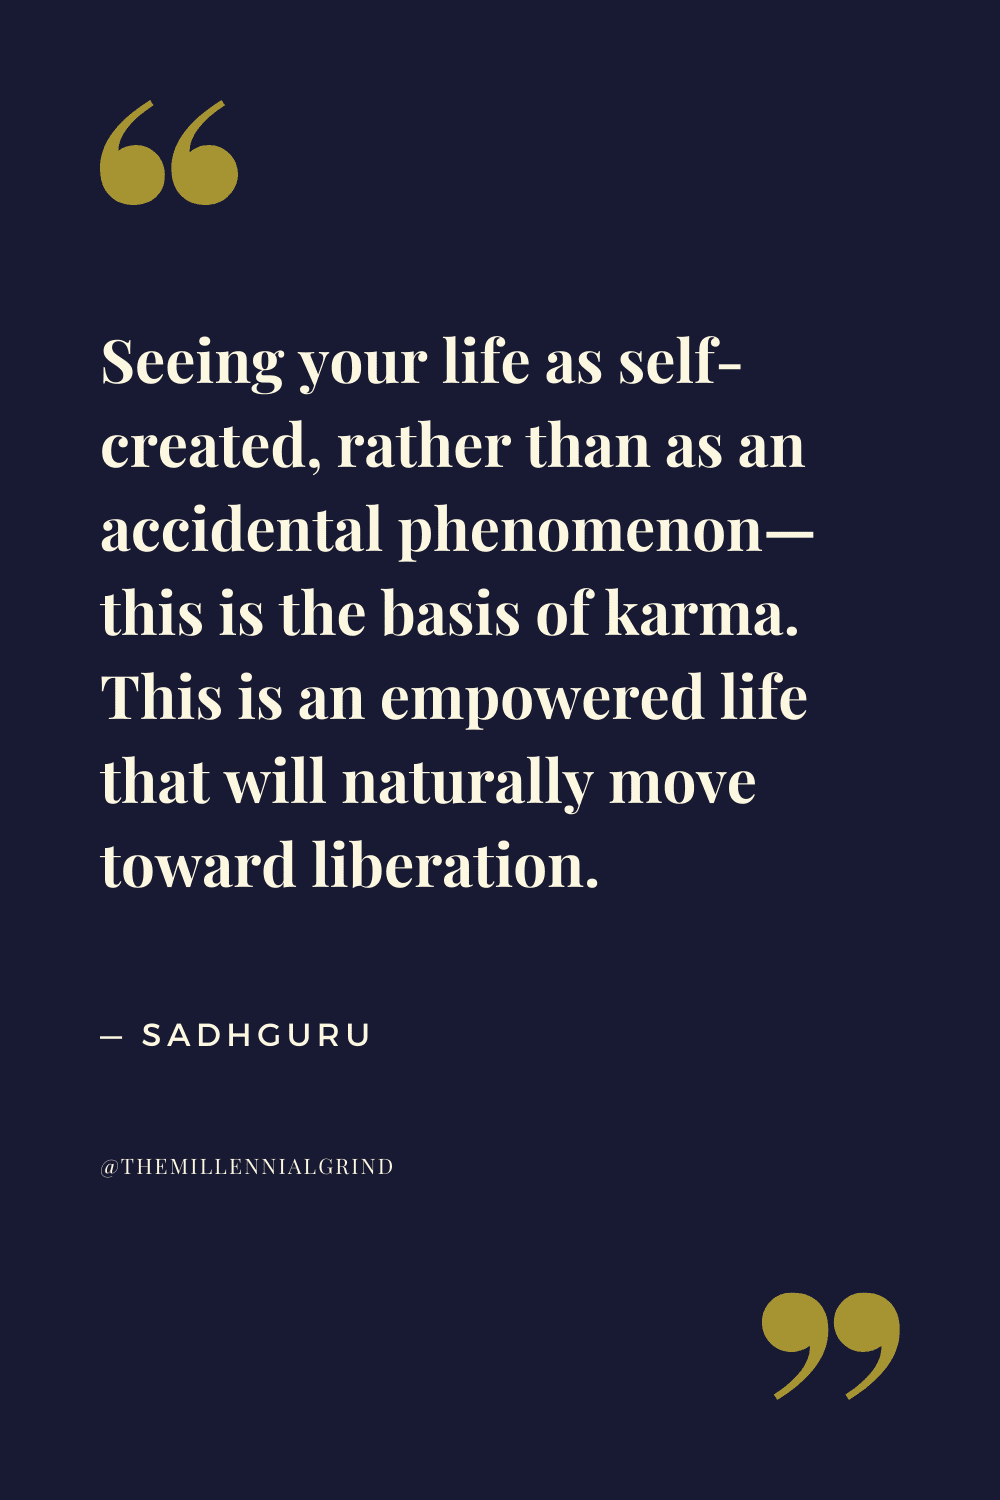 Seeing your life as self-created, rather than as an accidental phenomenon—this is the basis of karma. This is an empowered life that will naturally move toward liberation.